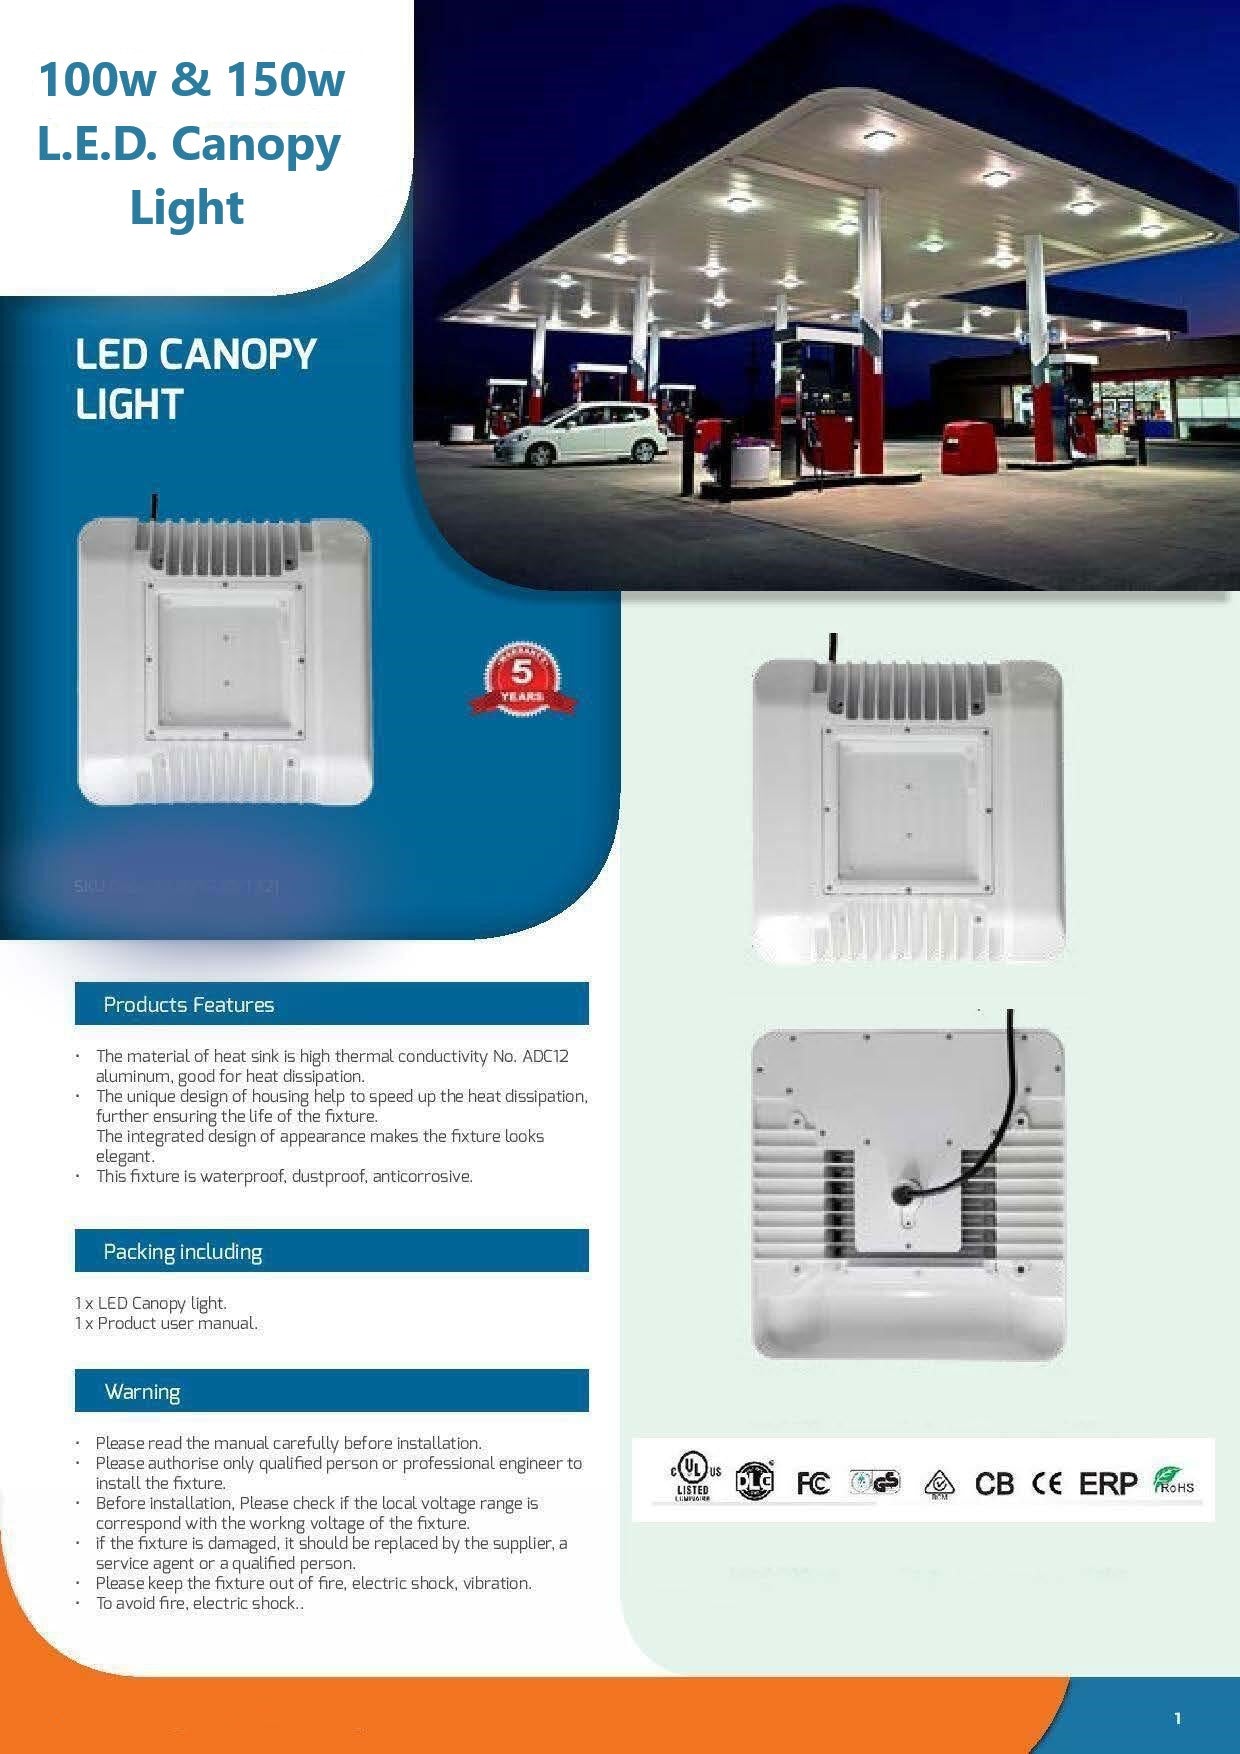 L.E.D. Canopy Lights for Garage and Forecourts